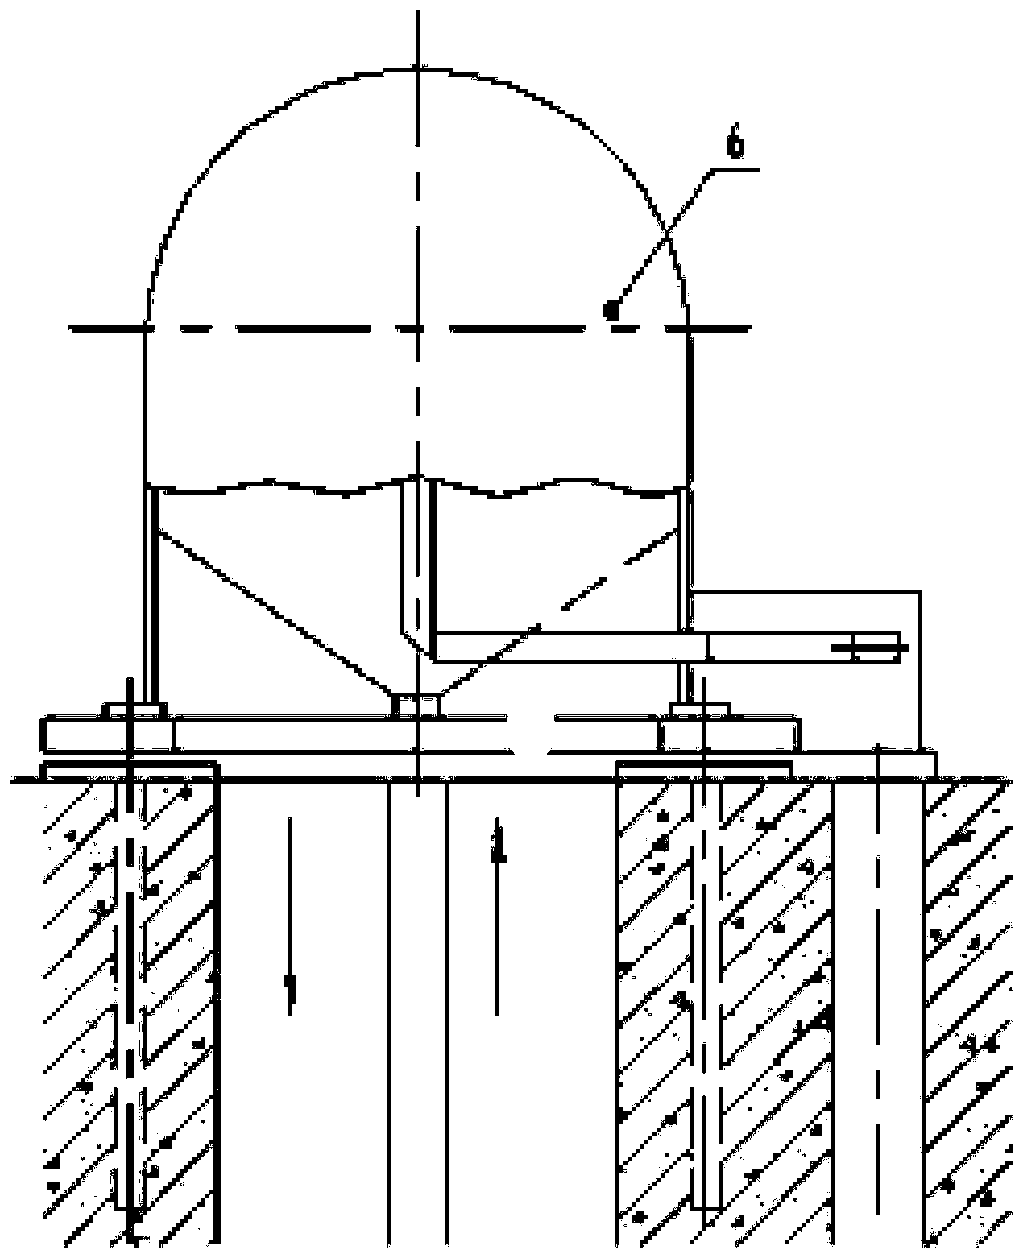 An air-cooled turbogenerator wind path structure